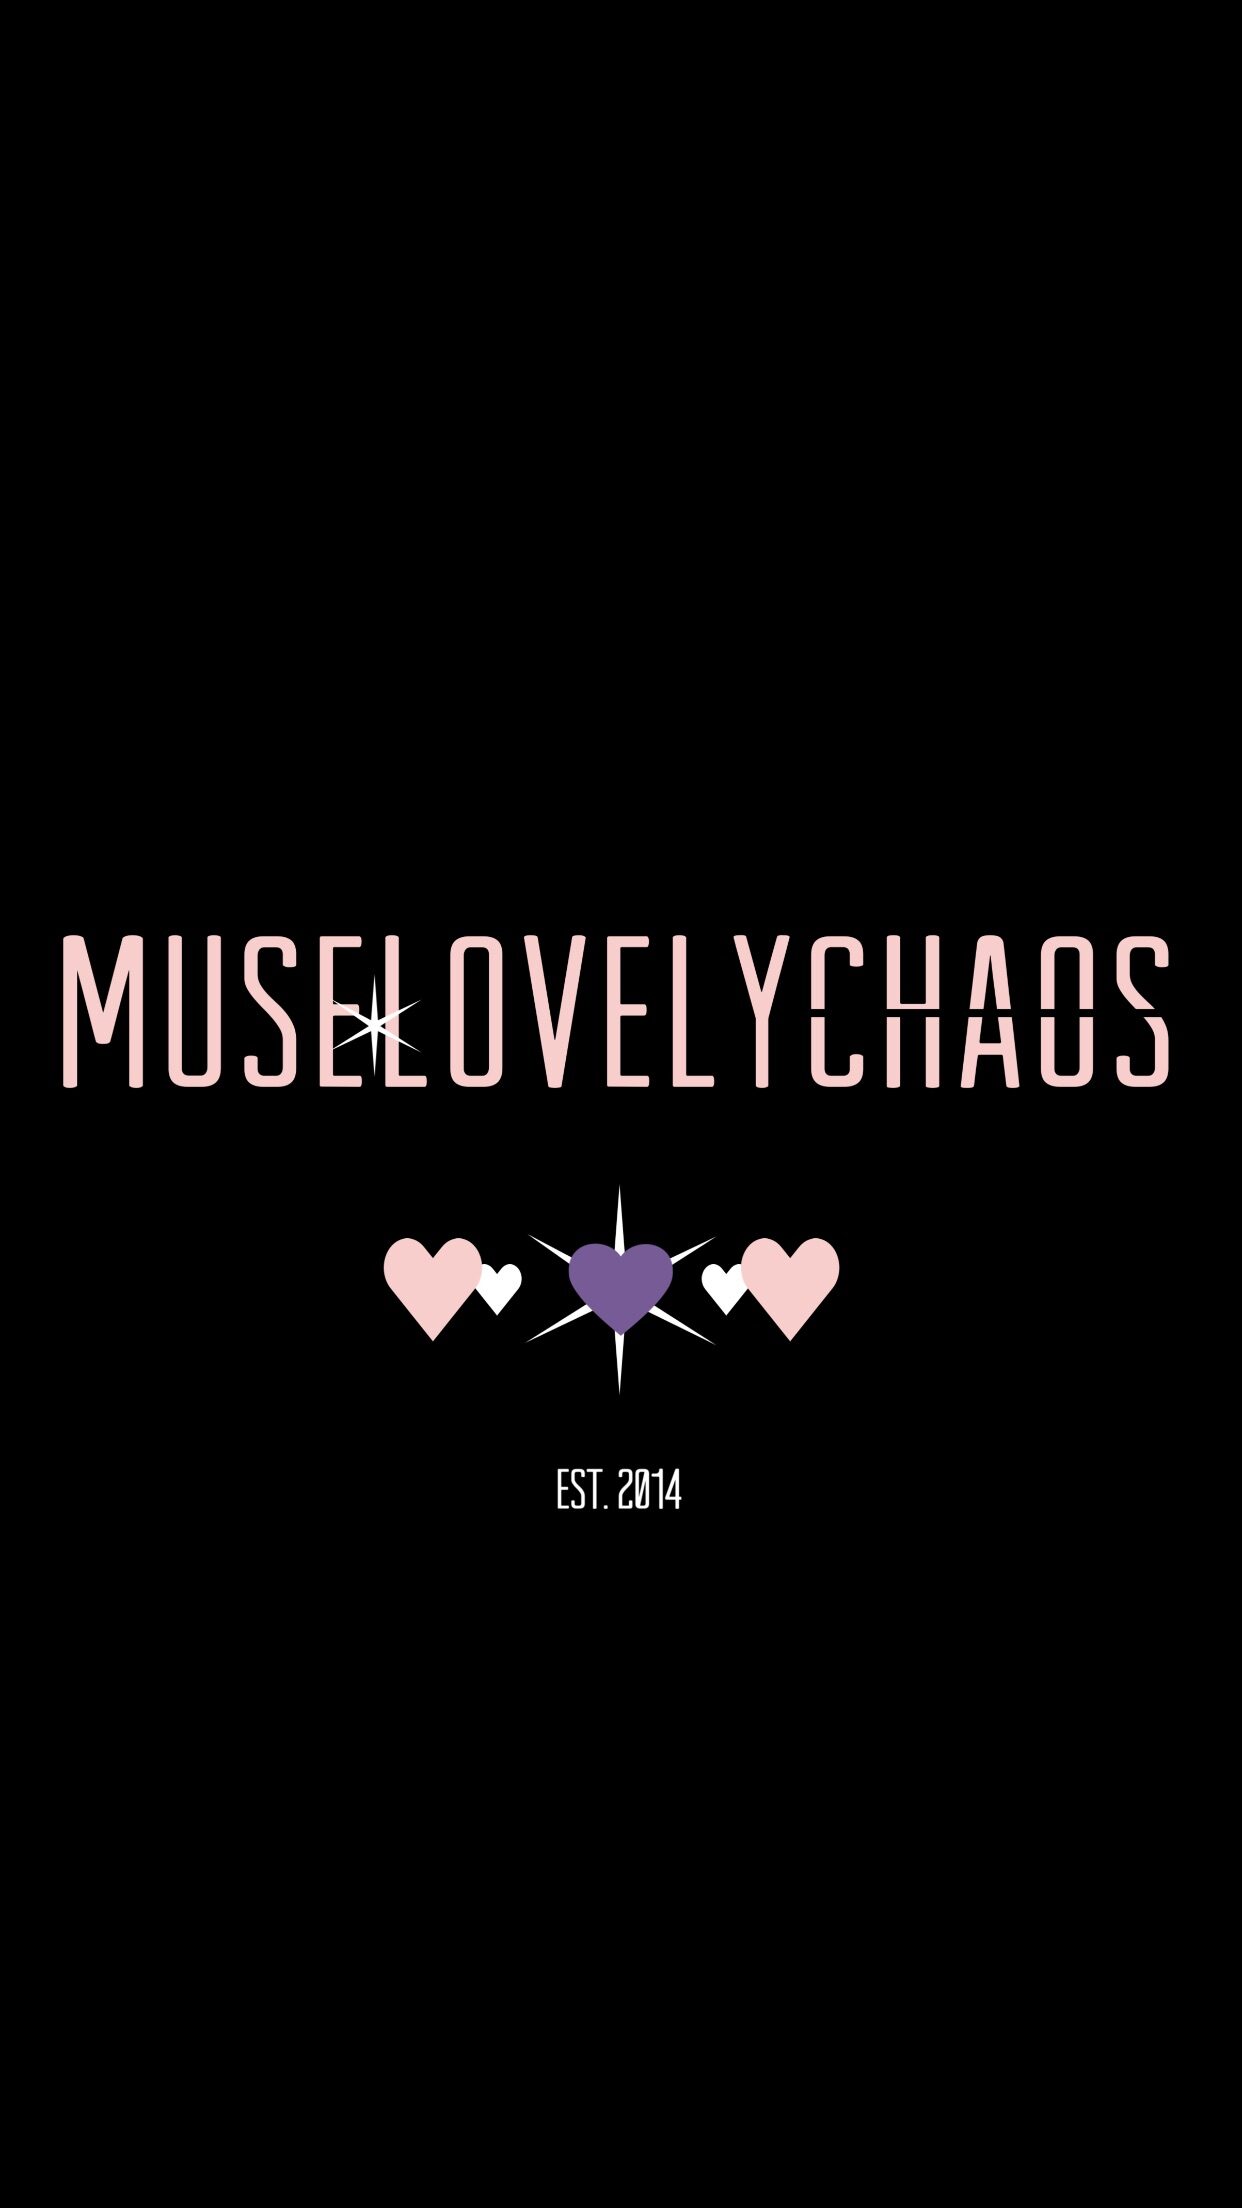 MUSE LOVELY CHAOS